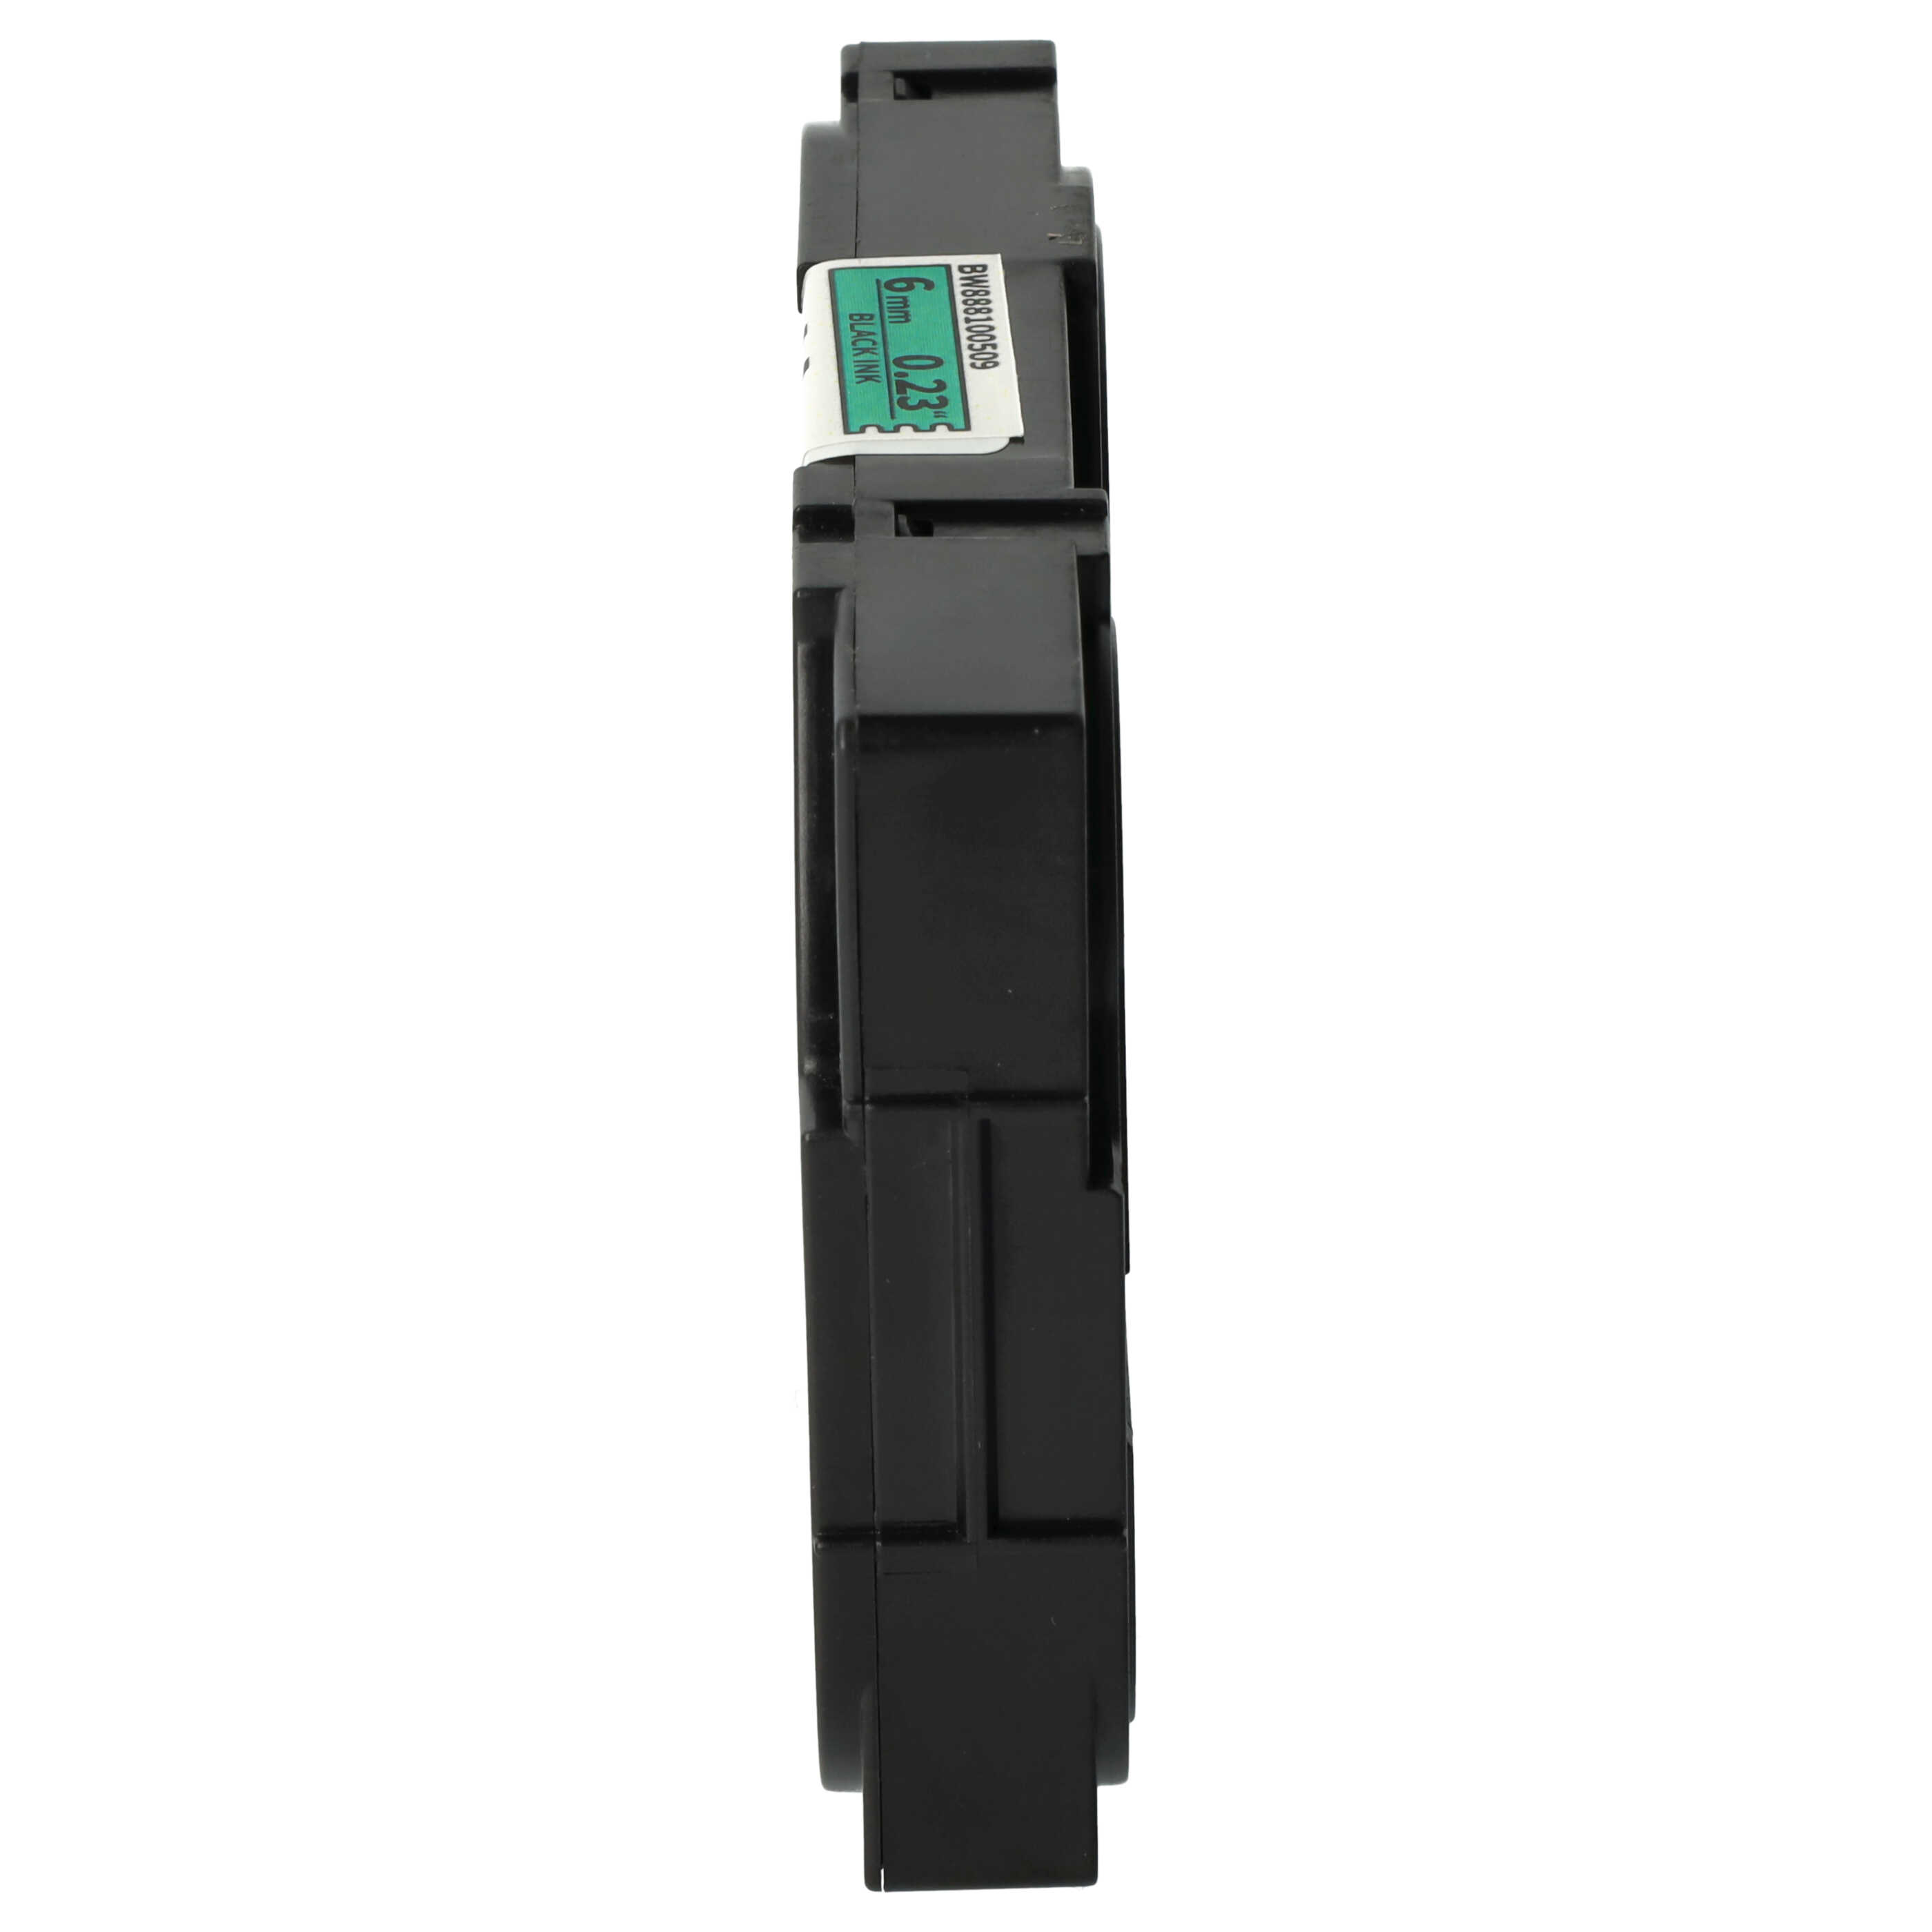 Label Tape as Replacement for Brother TZE-FX711, TZFX711, TZeFX711, TZ-FX711 - 6 mm Black to Green, Flexible